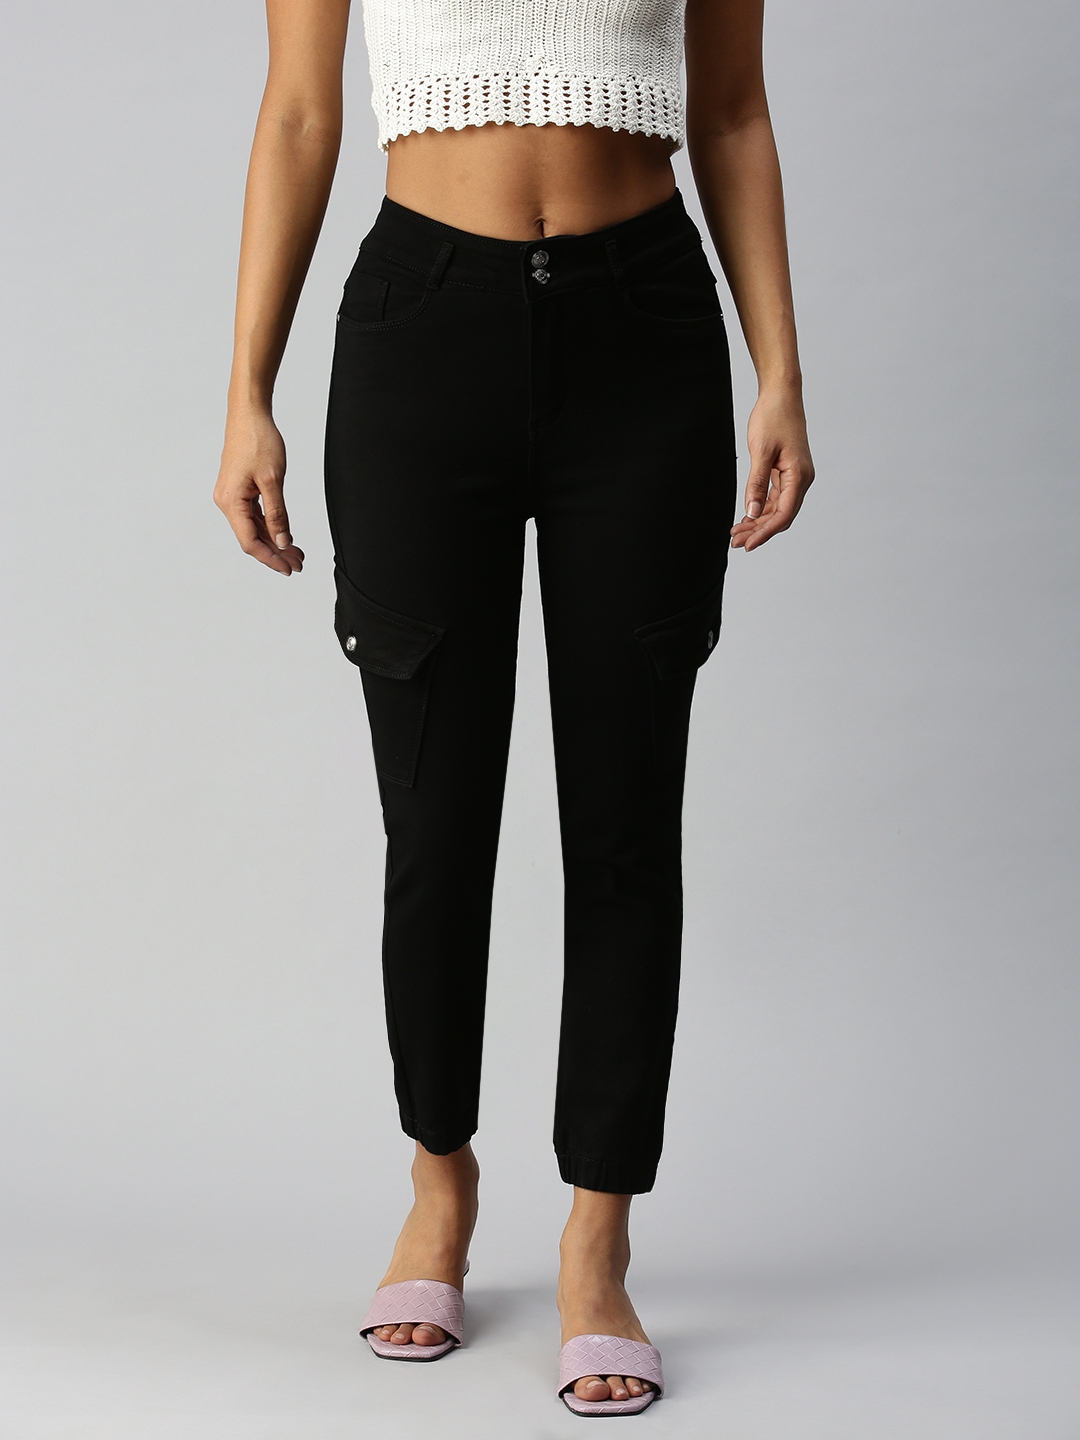 Showoff Women's Jogger Clean Look Black Jeans